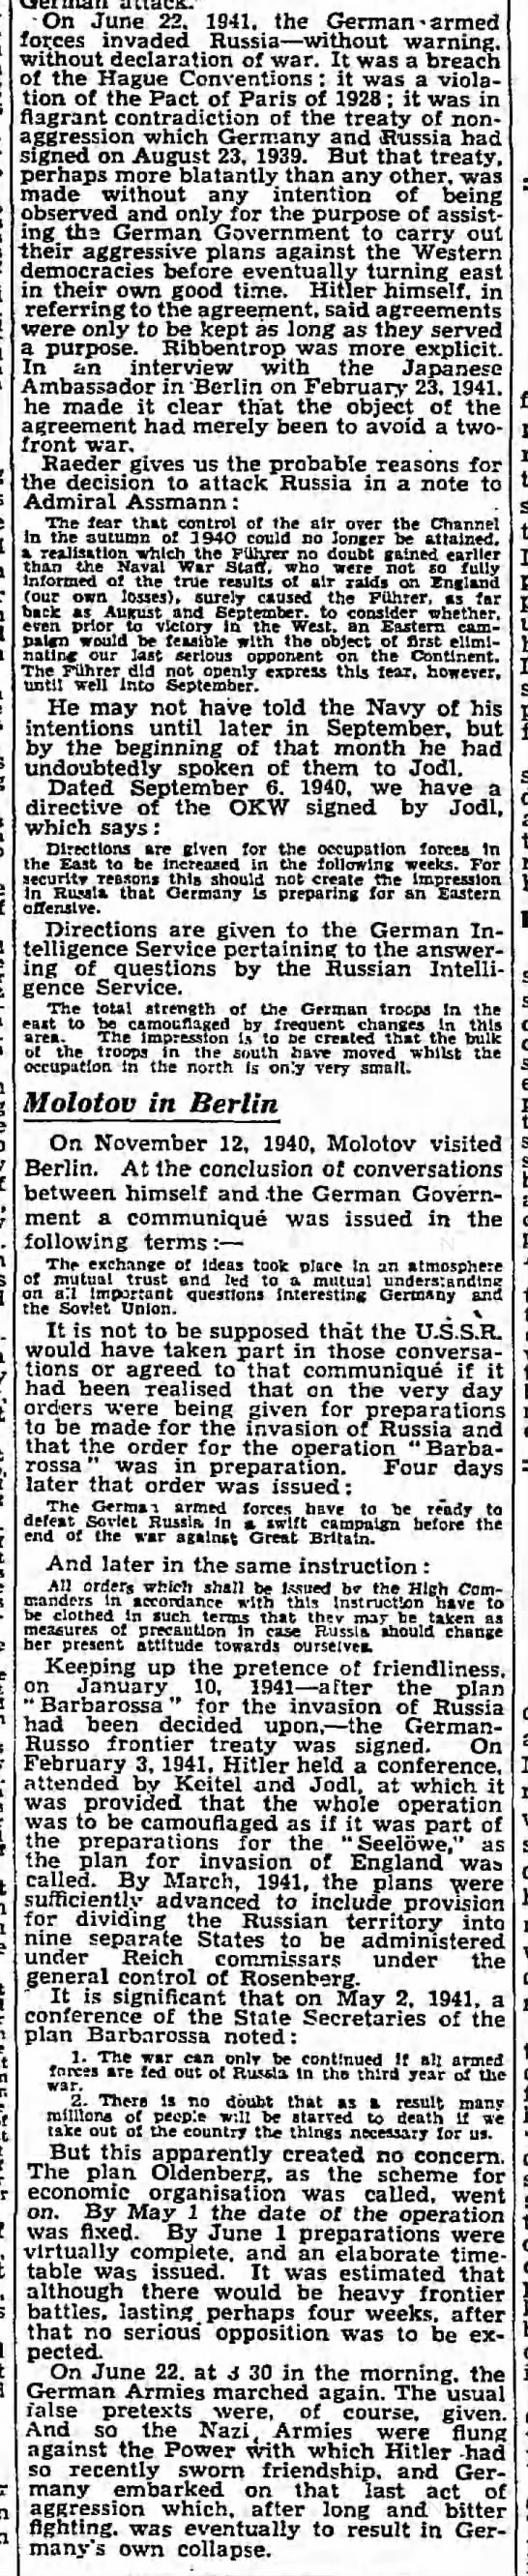 1945 newspaper summary of history of Germany's decision to attack Russia in Operation Barbarossa - 